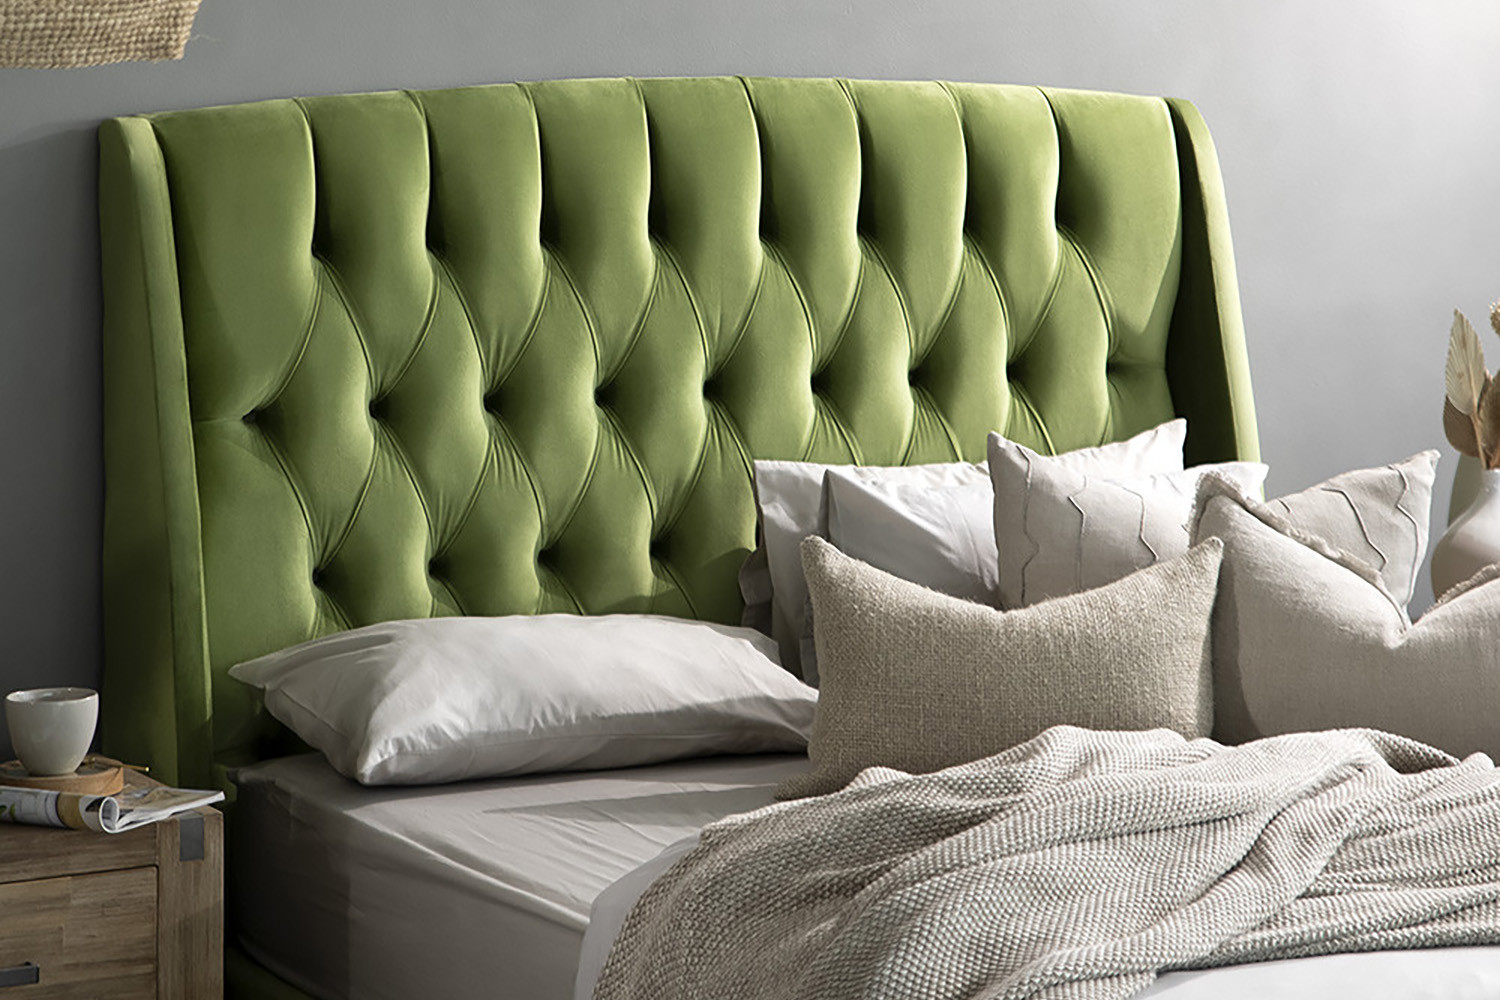 5 Best Tips to Choose Your Ideal Fabric Headboard